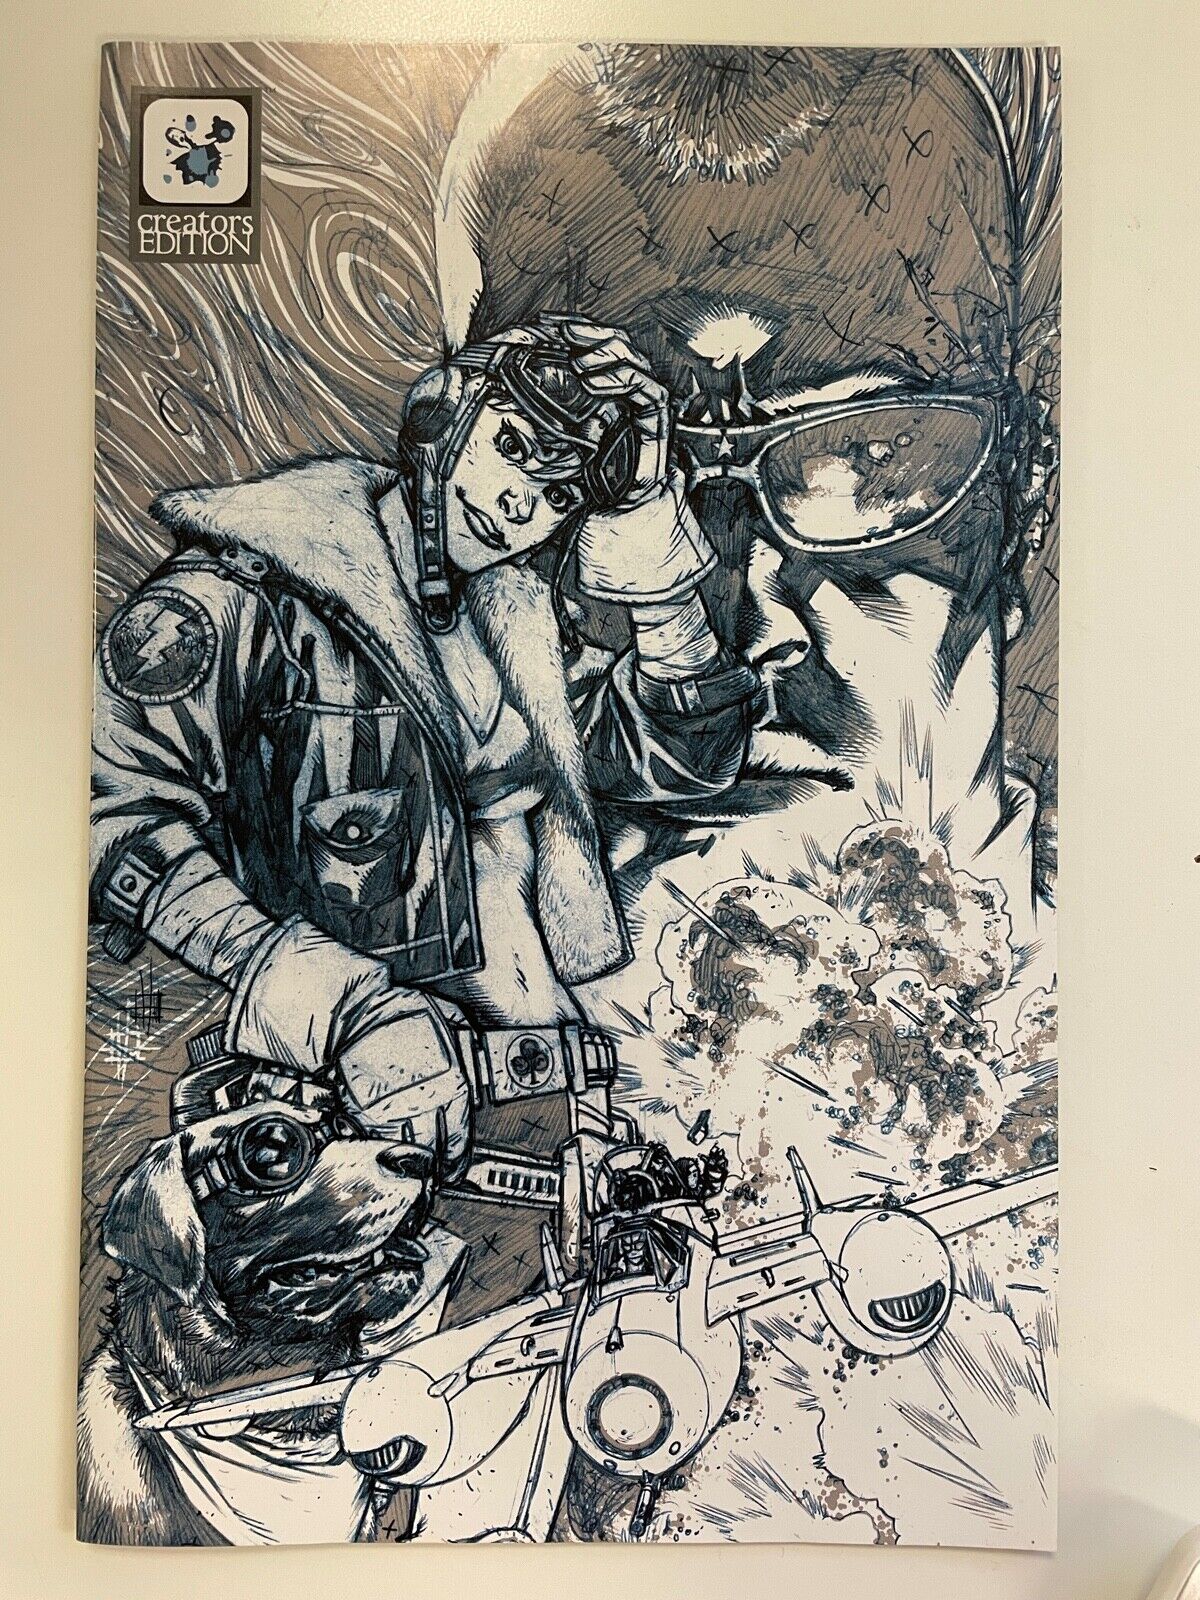 IDW WILD BLUE YONDER #1 CREATOR'S EDITION COVER : HTF : NM CONDITION